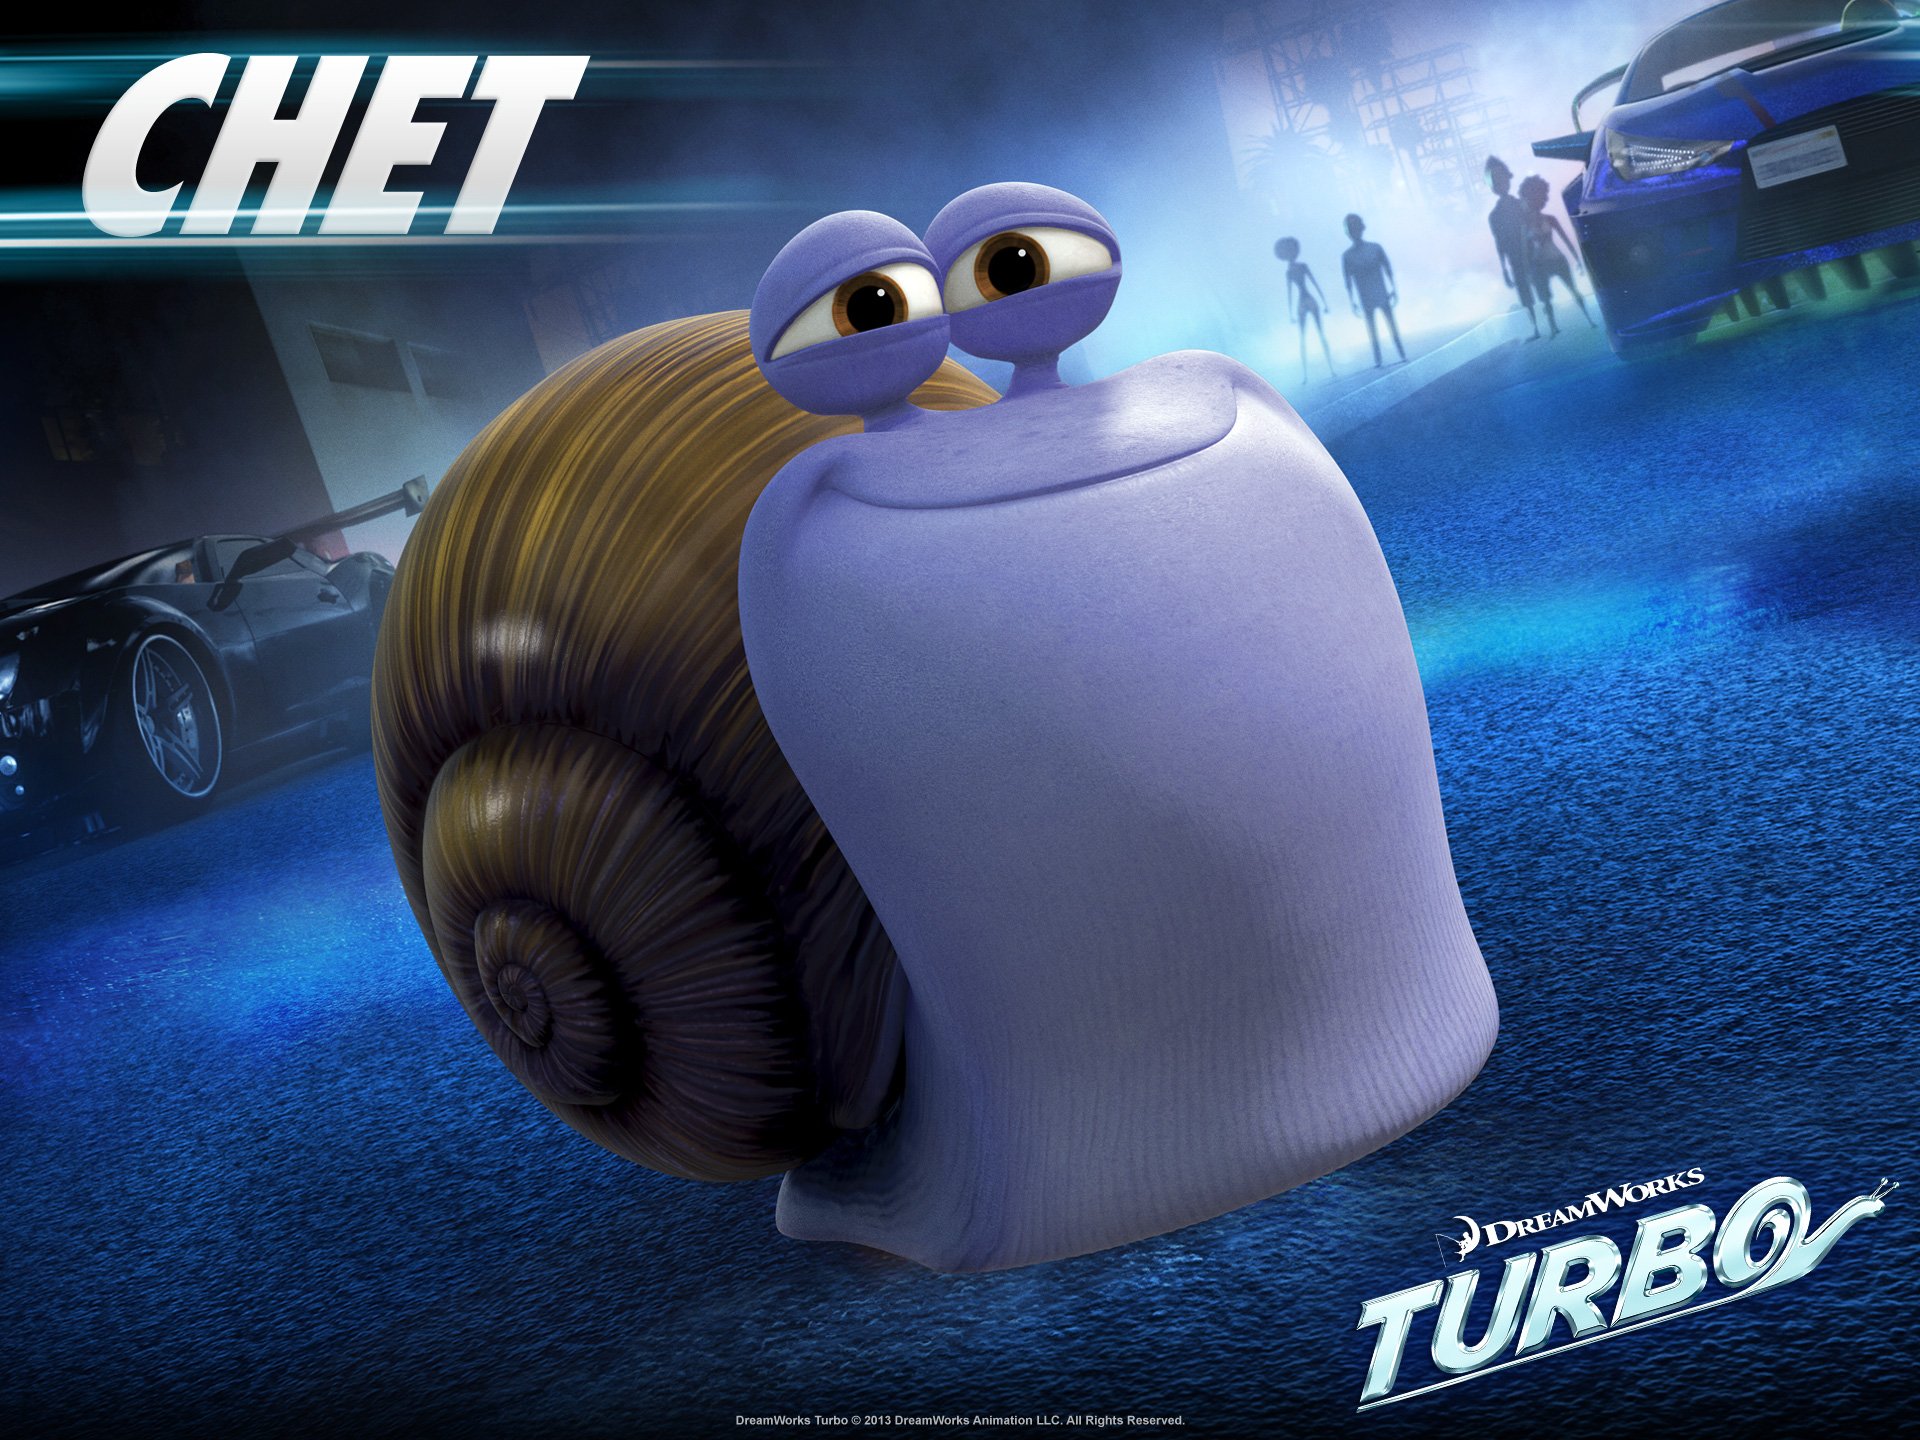 Turbo Movie 2013 Wallpapers, Facebook Cover Photos